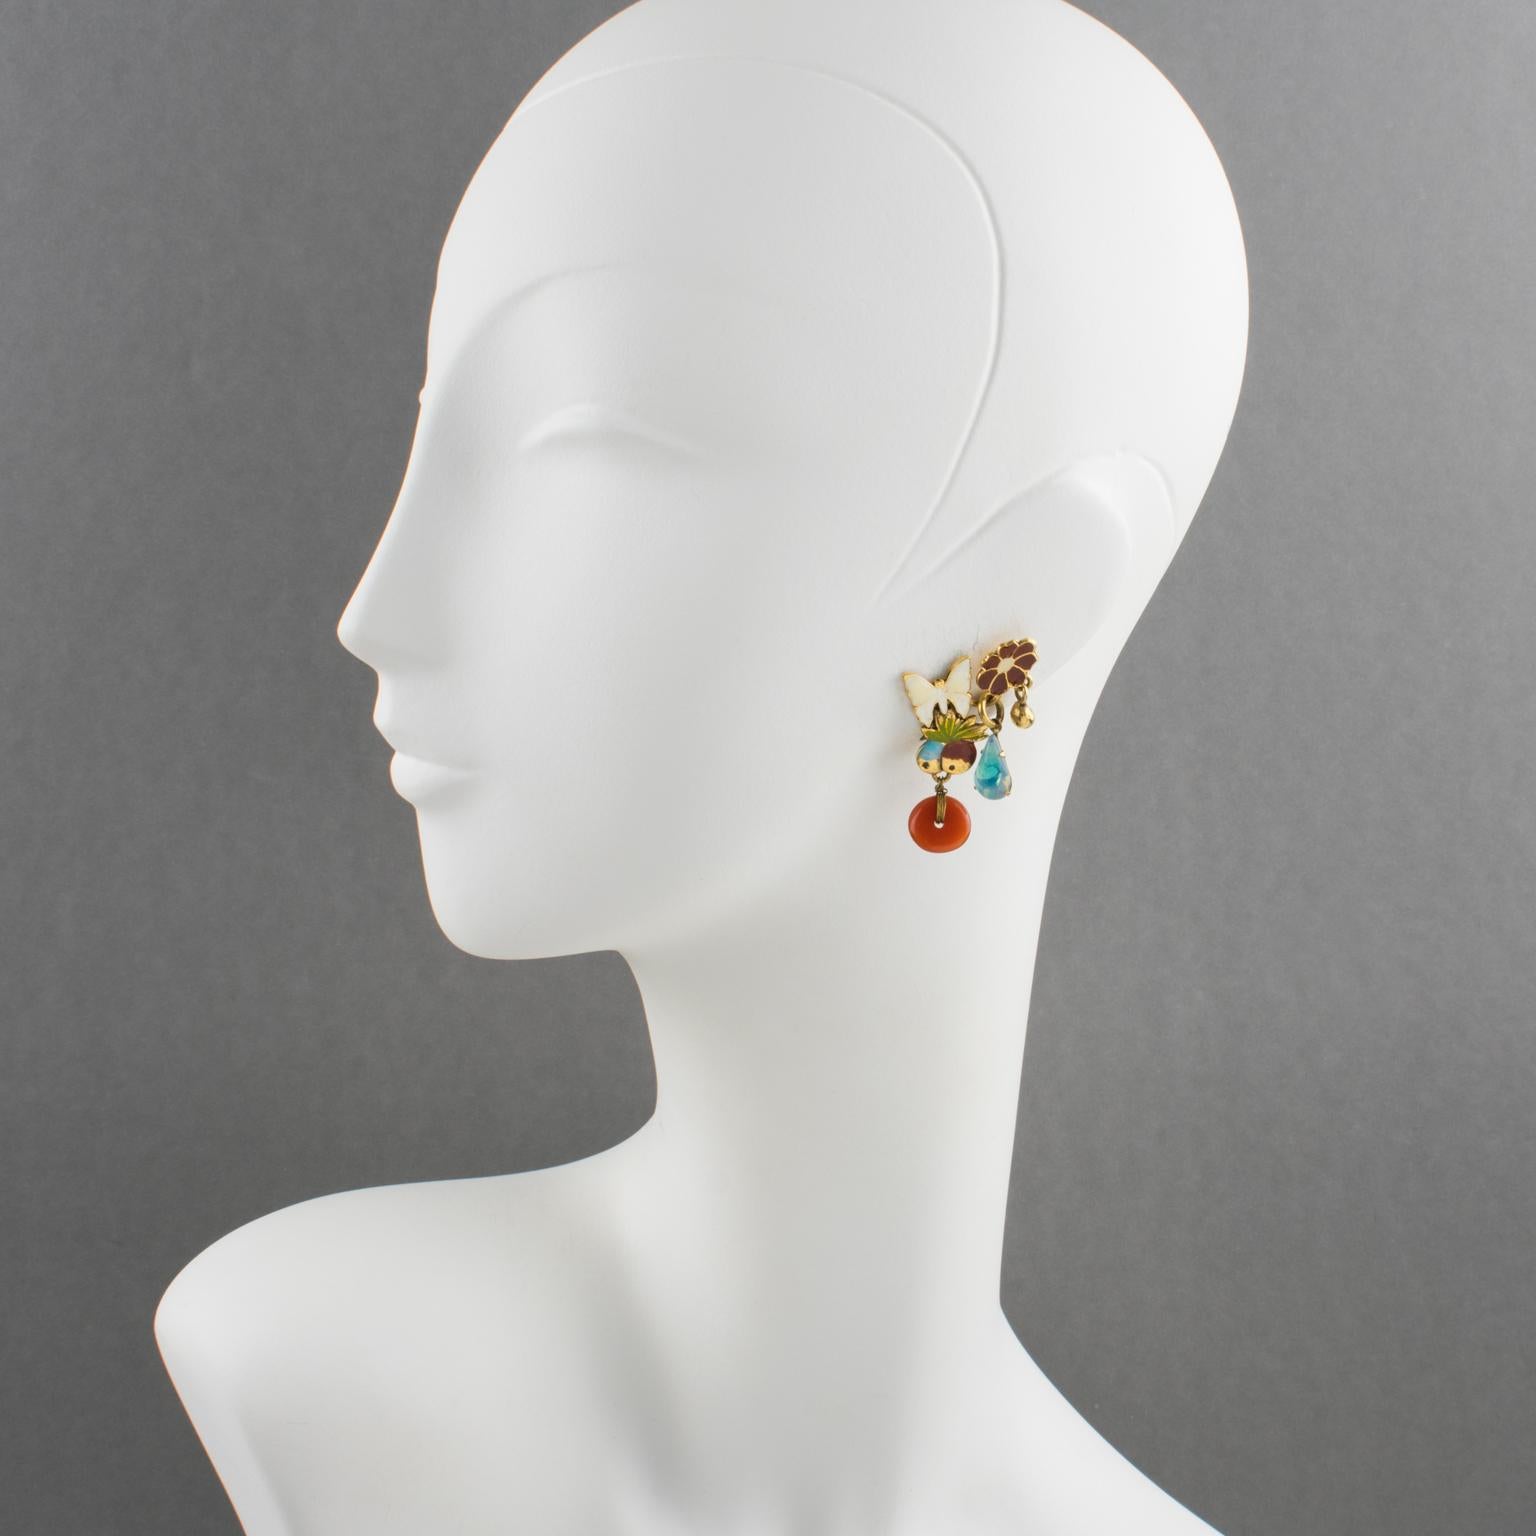 Zoe Coste Paris designed those lovely dangling clip-on earrings. The composition is built with gilt metal flowers, butterflies, and fruits ornate with white, red, and green enamel. The earrings are embellished with dangling blue teardrop glass